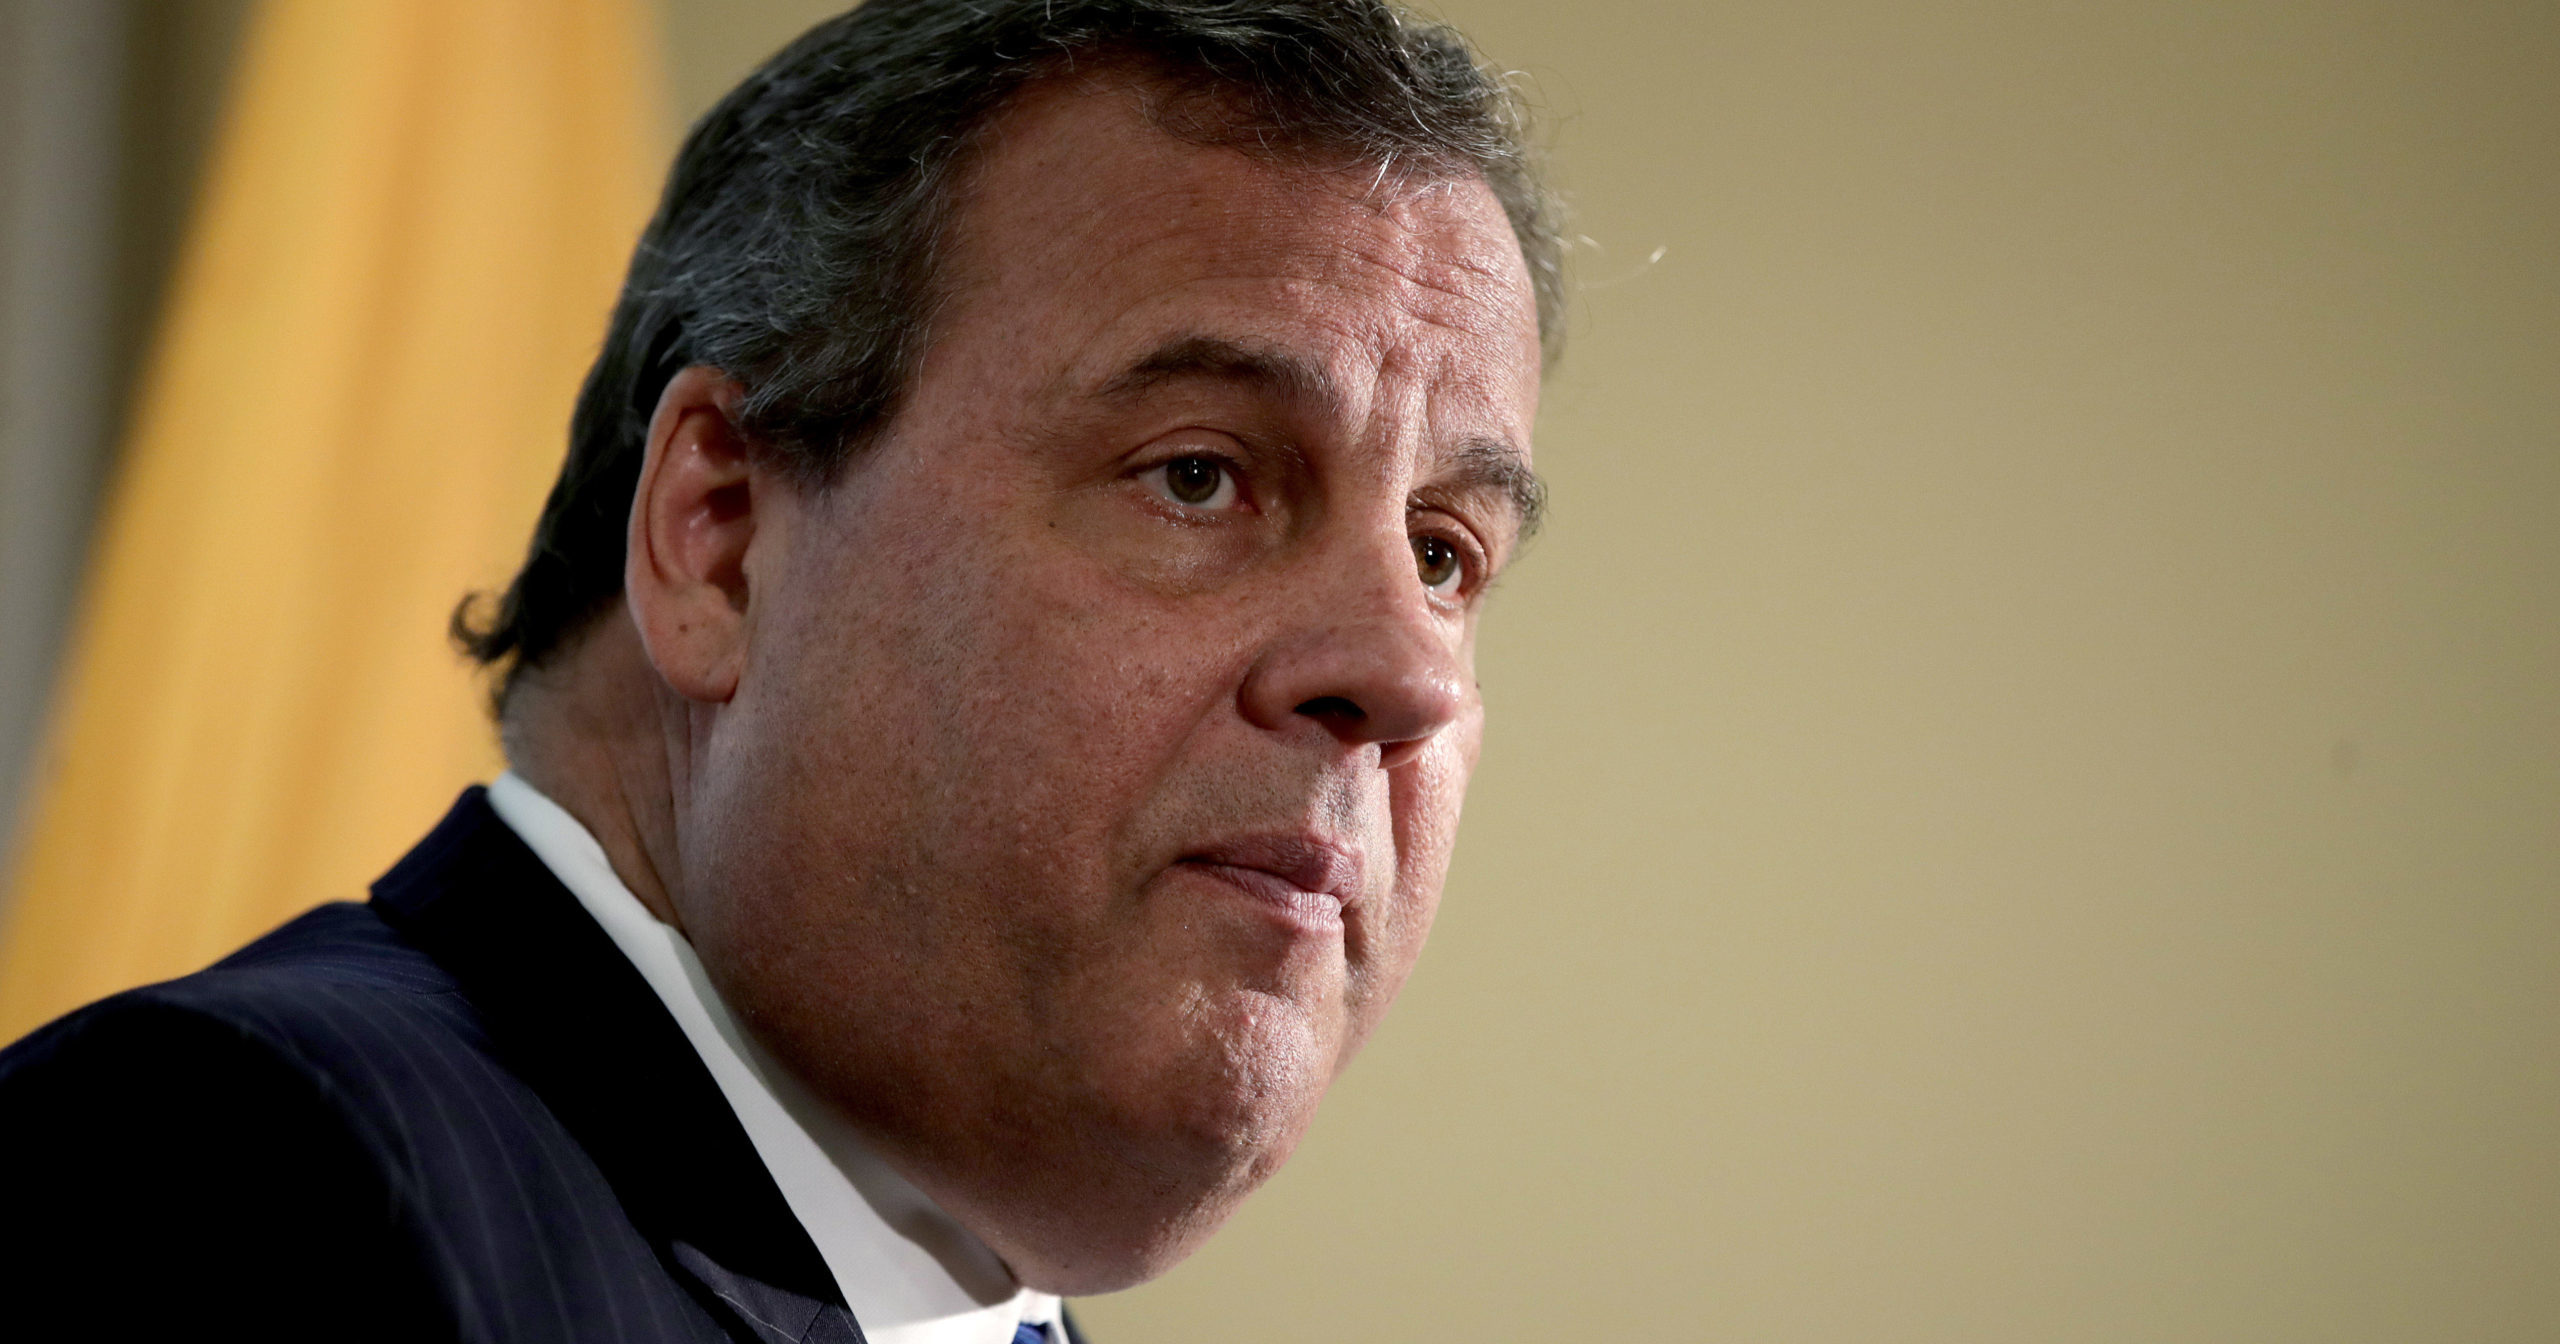 Former New Jersey Gov. Chris Christie said on Oct. 10, 2020, that he has been discharged from a New Jersey hospital where he spent a week following his announcement that he had contracted COVID-19.